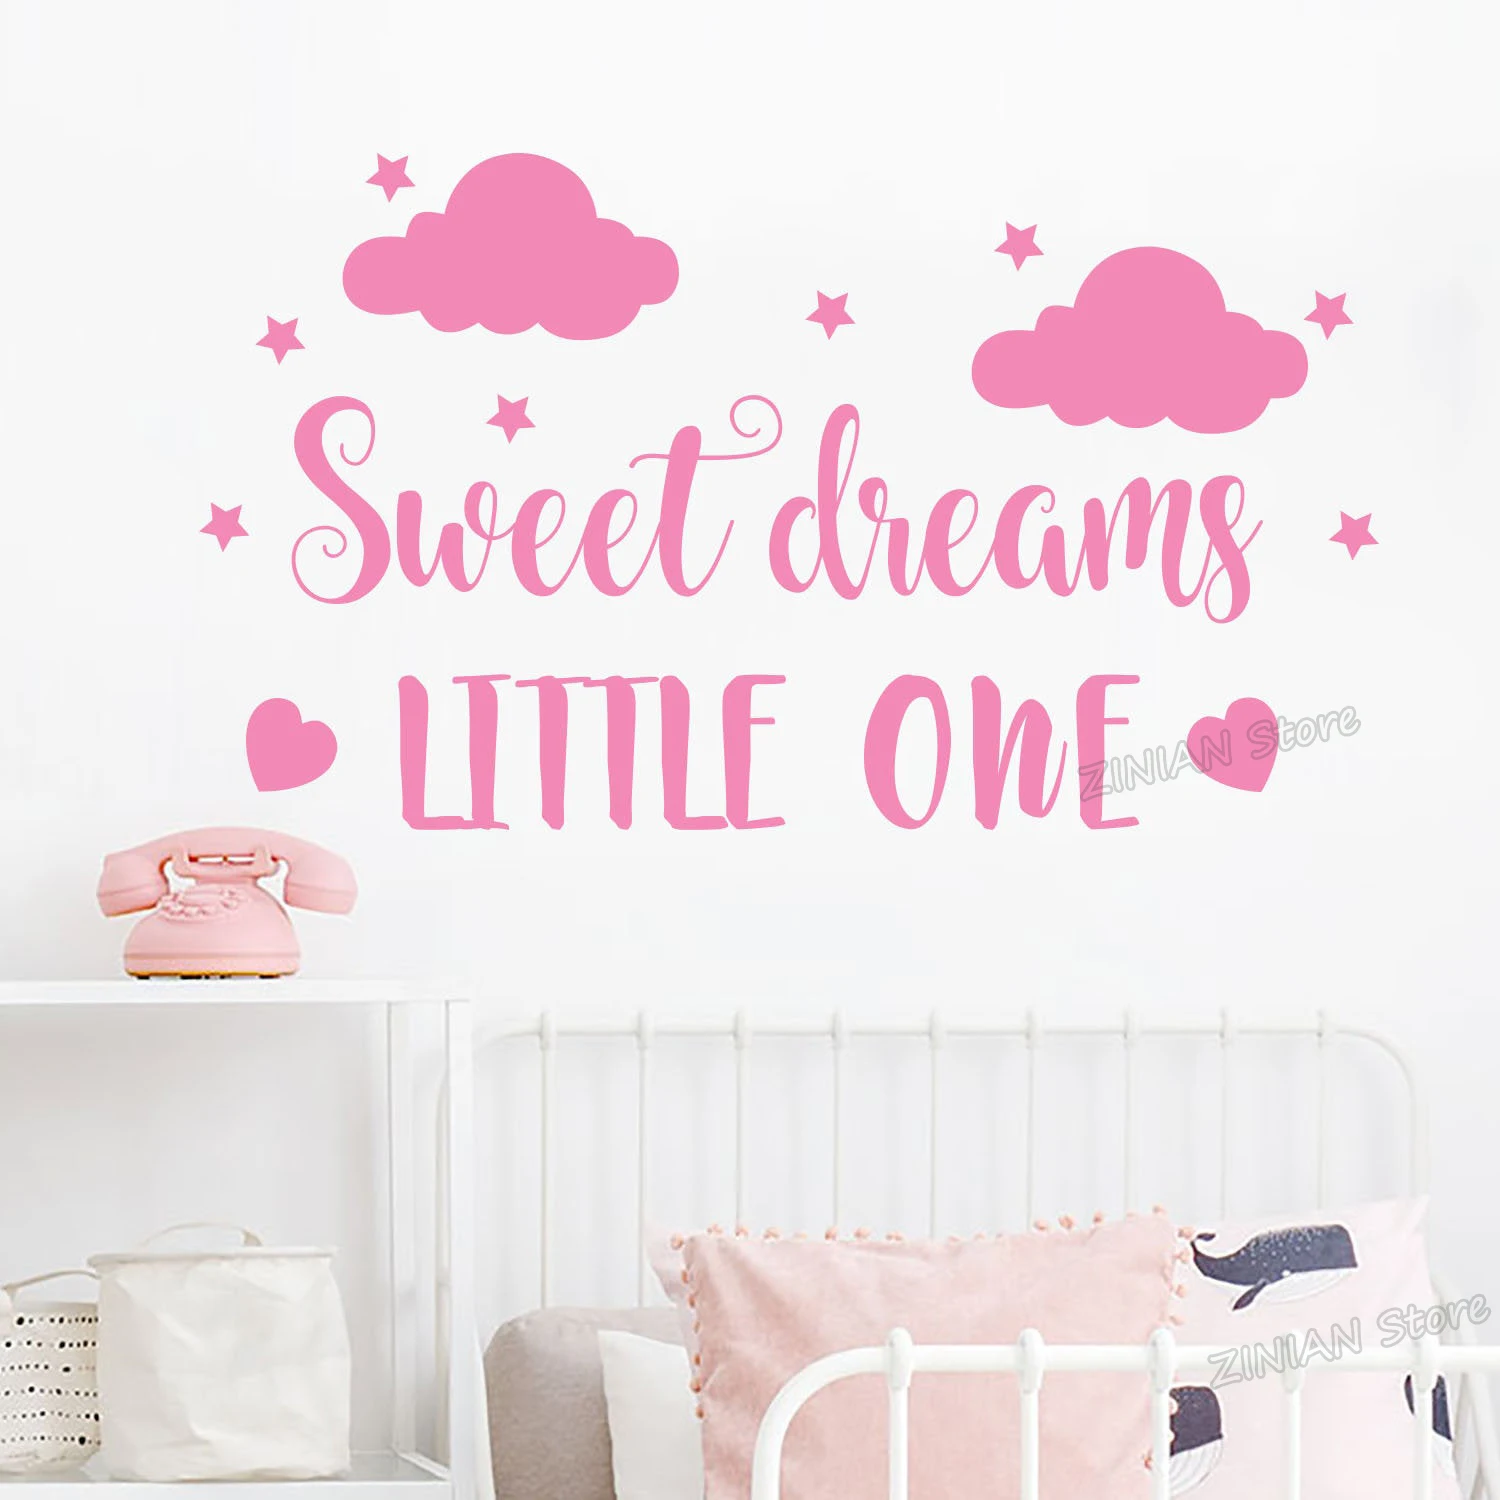 

Sweet Dreams Little One Wall Stickers for Baby Nursery Clouds Star Wall Decal Kids Room Wall Decor Murals Vinyl Art Decals A313